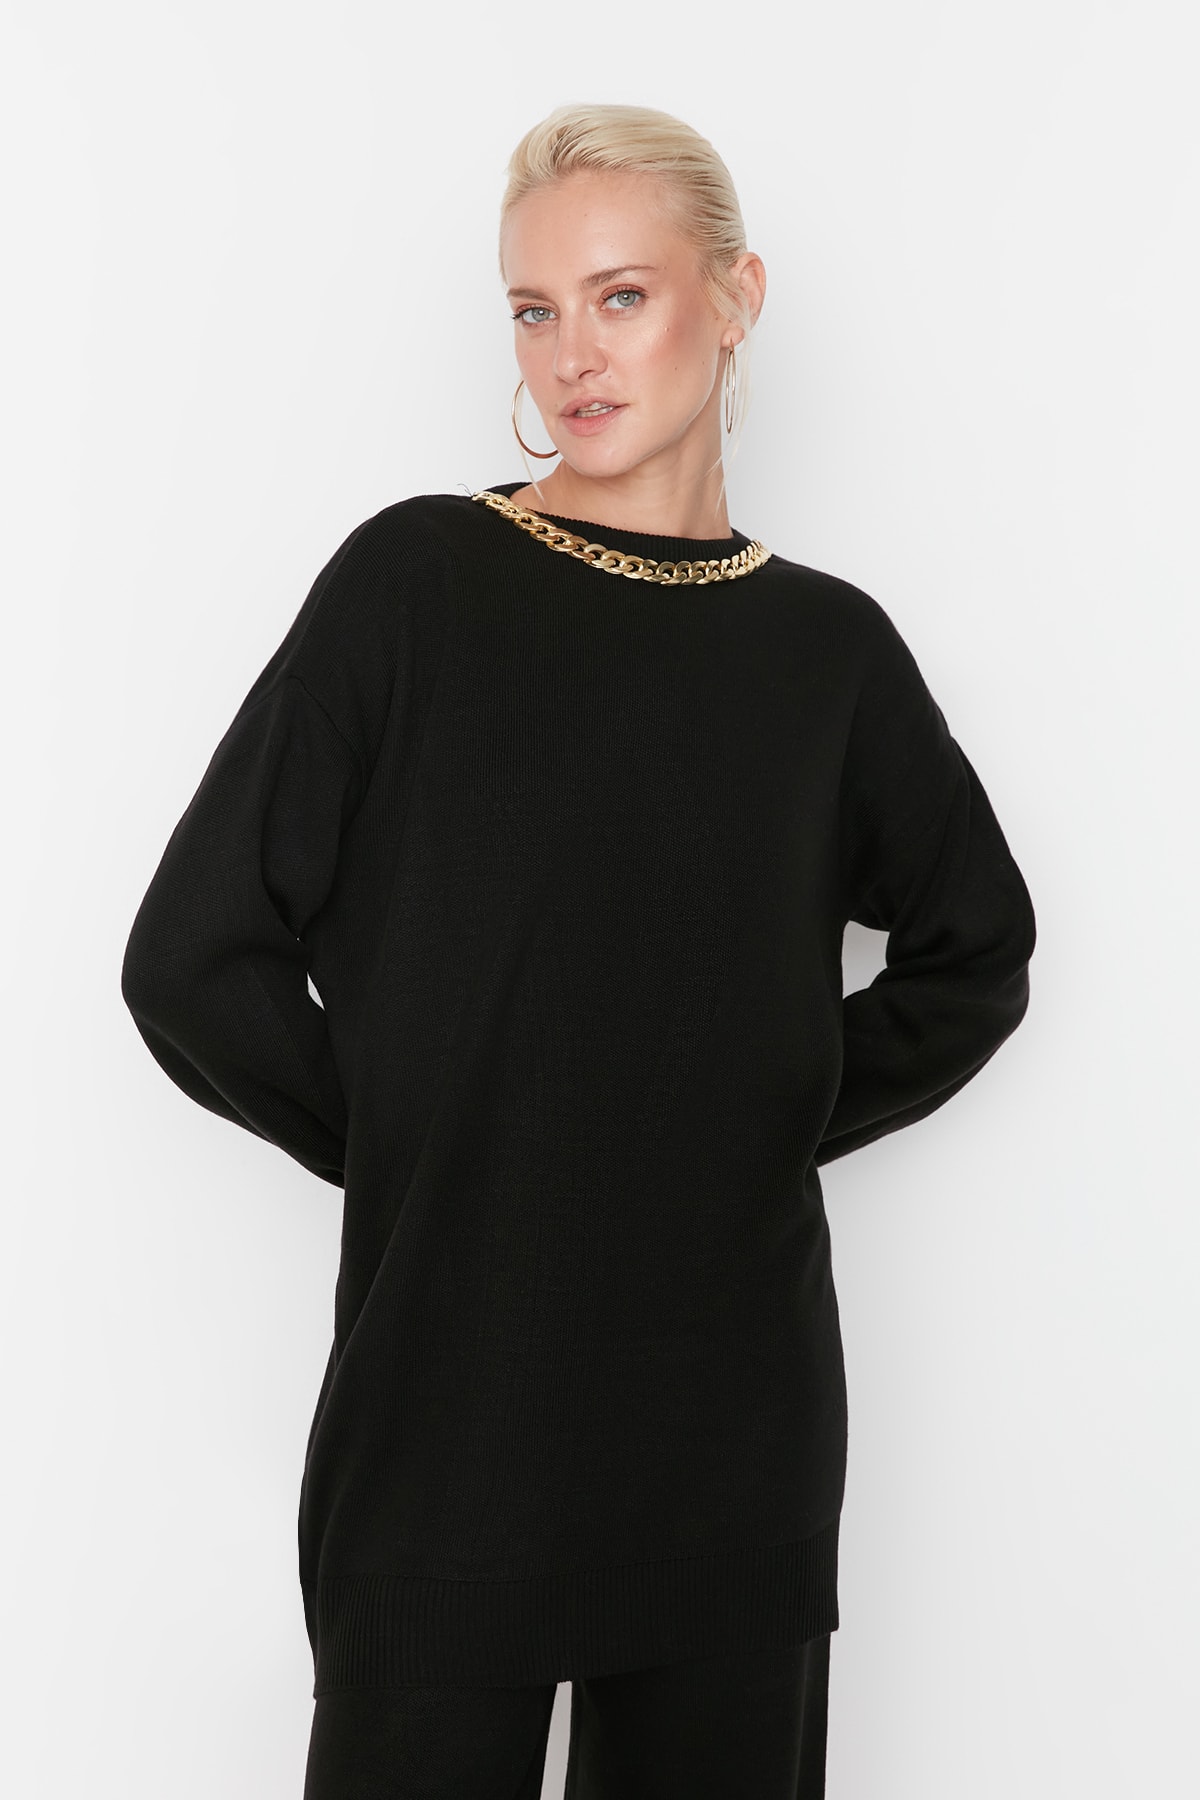 Levně Trendyol Black Collar with a Chain Necklace Sweater-Pants, Knitwear Suit